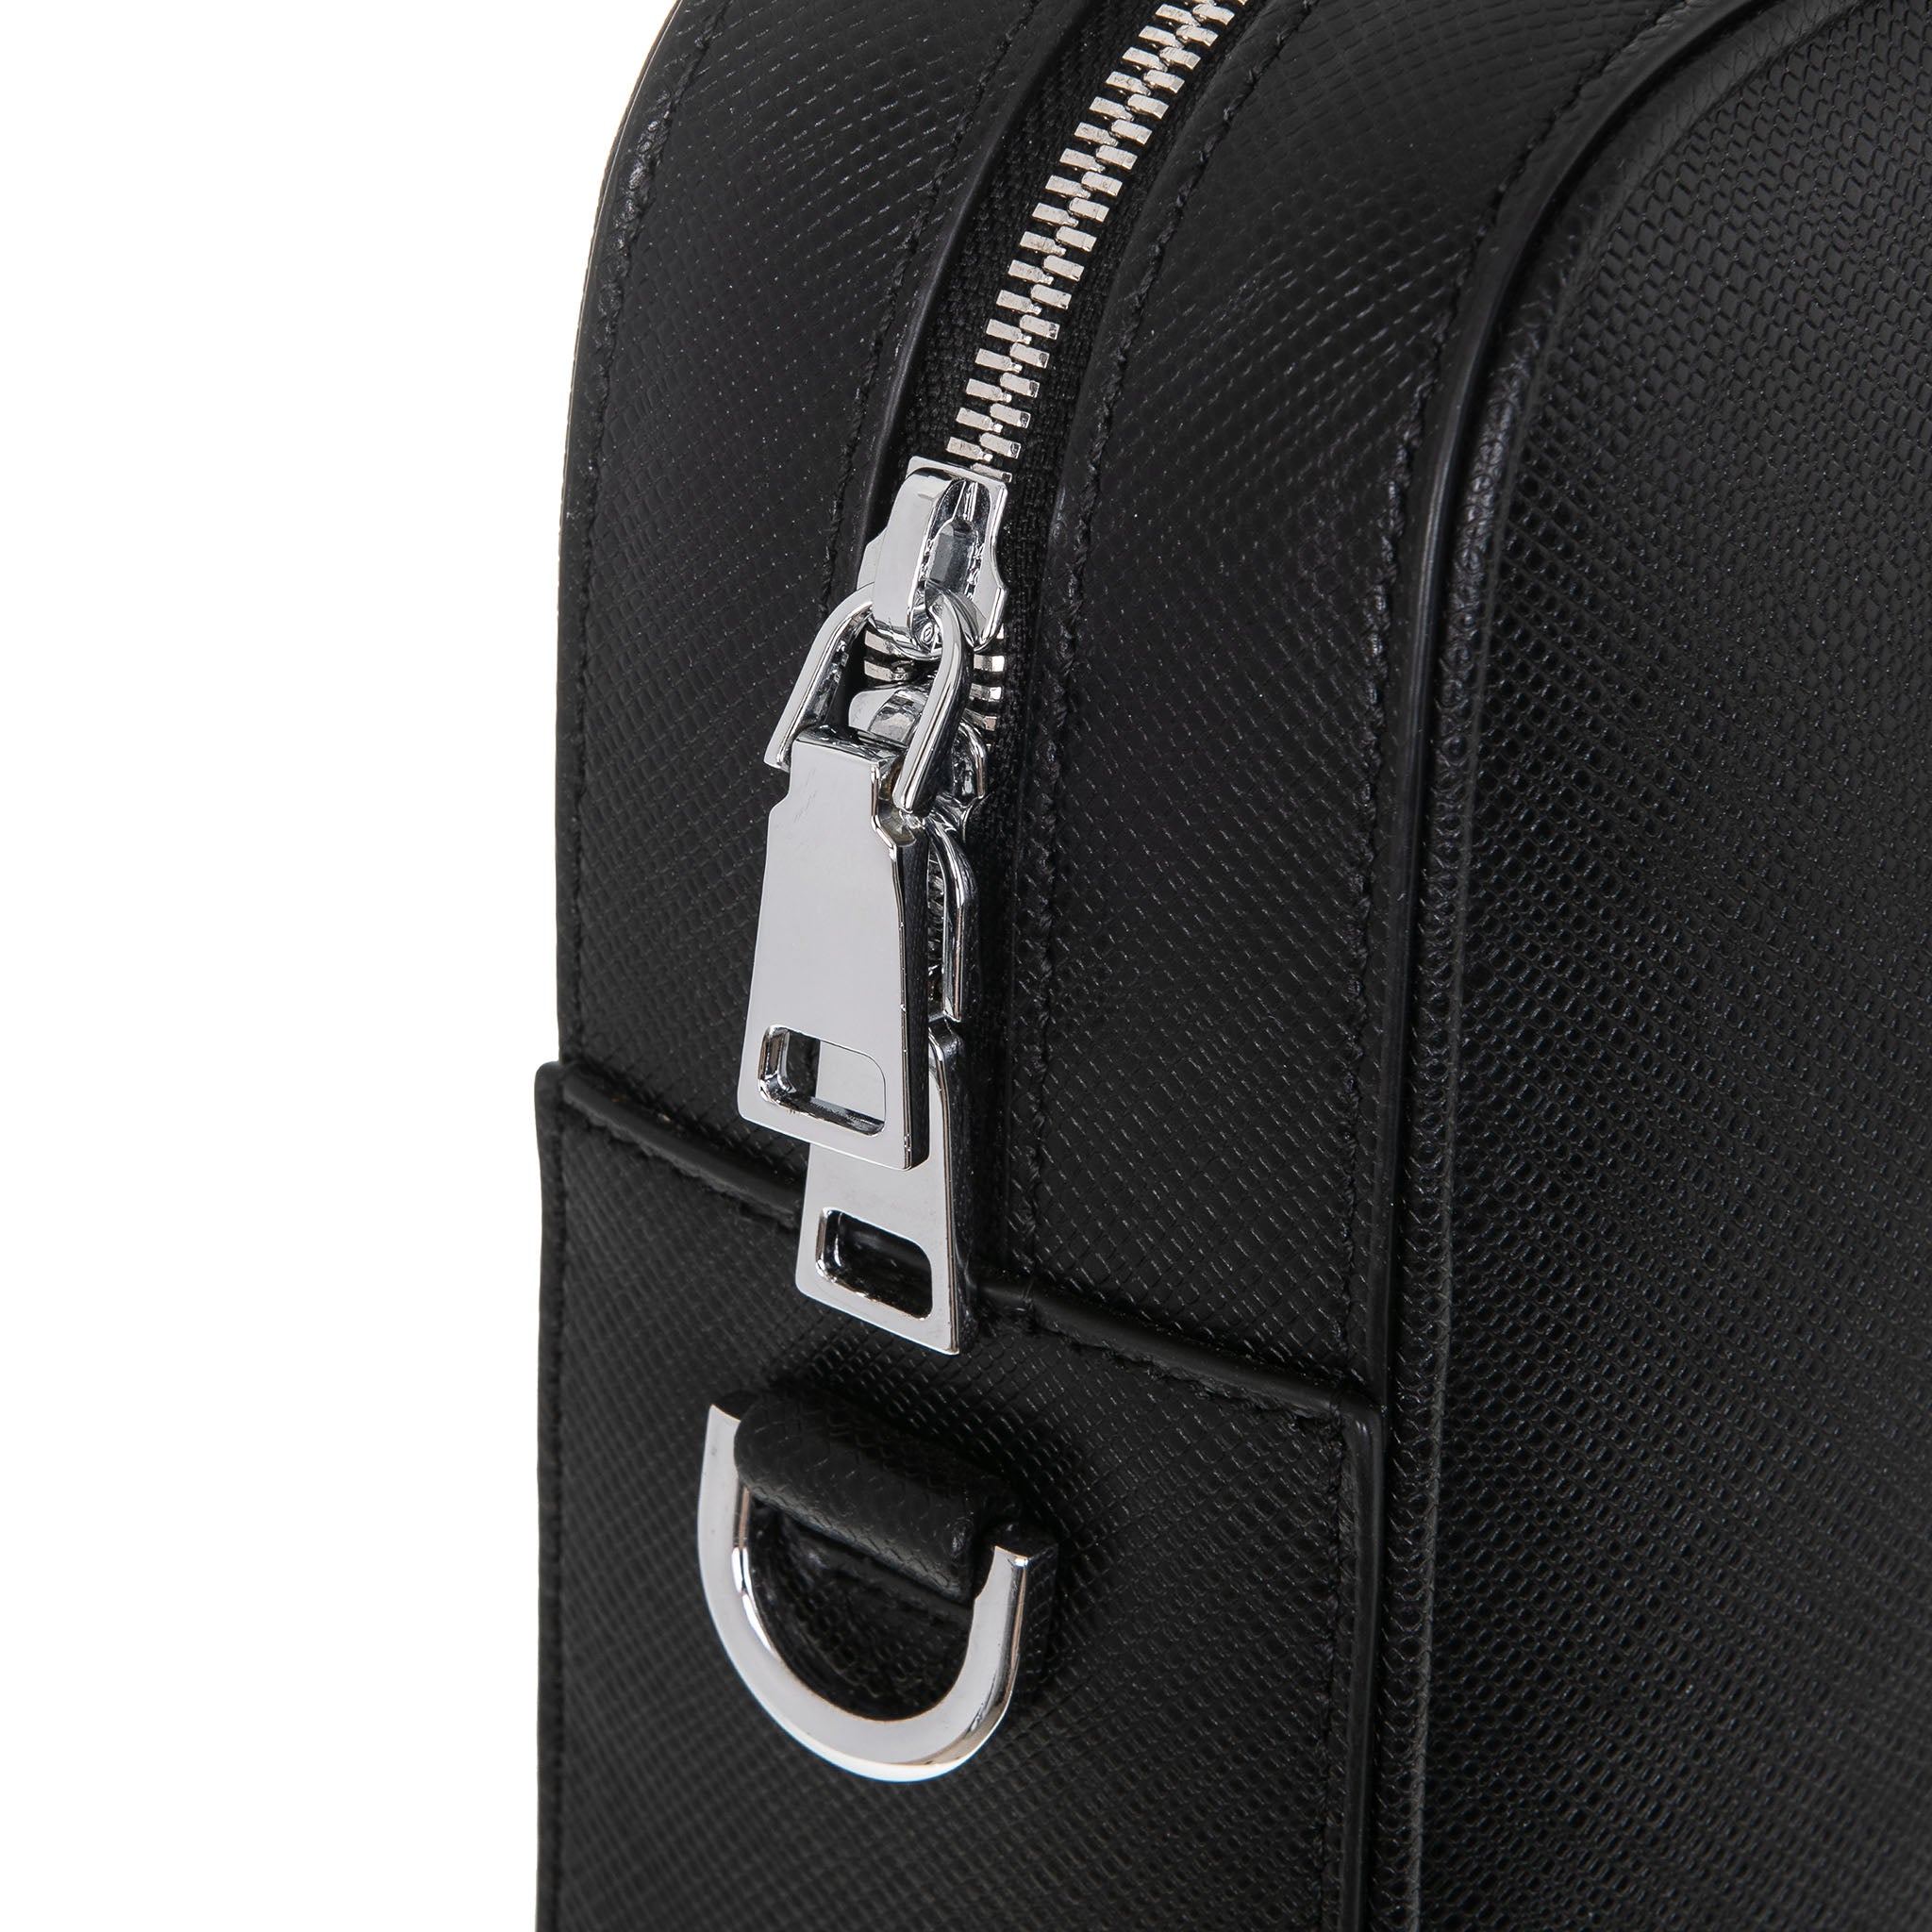 "Orion" Business Briefcase